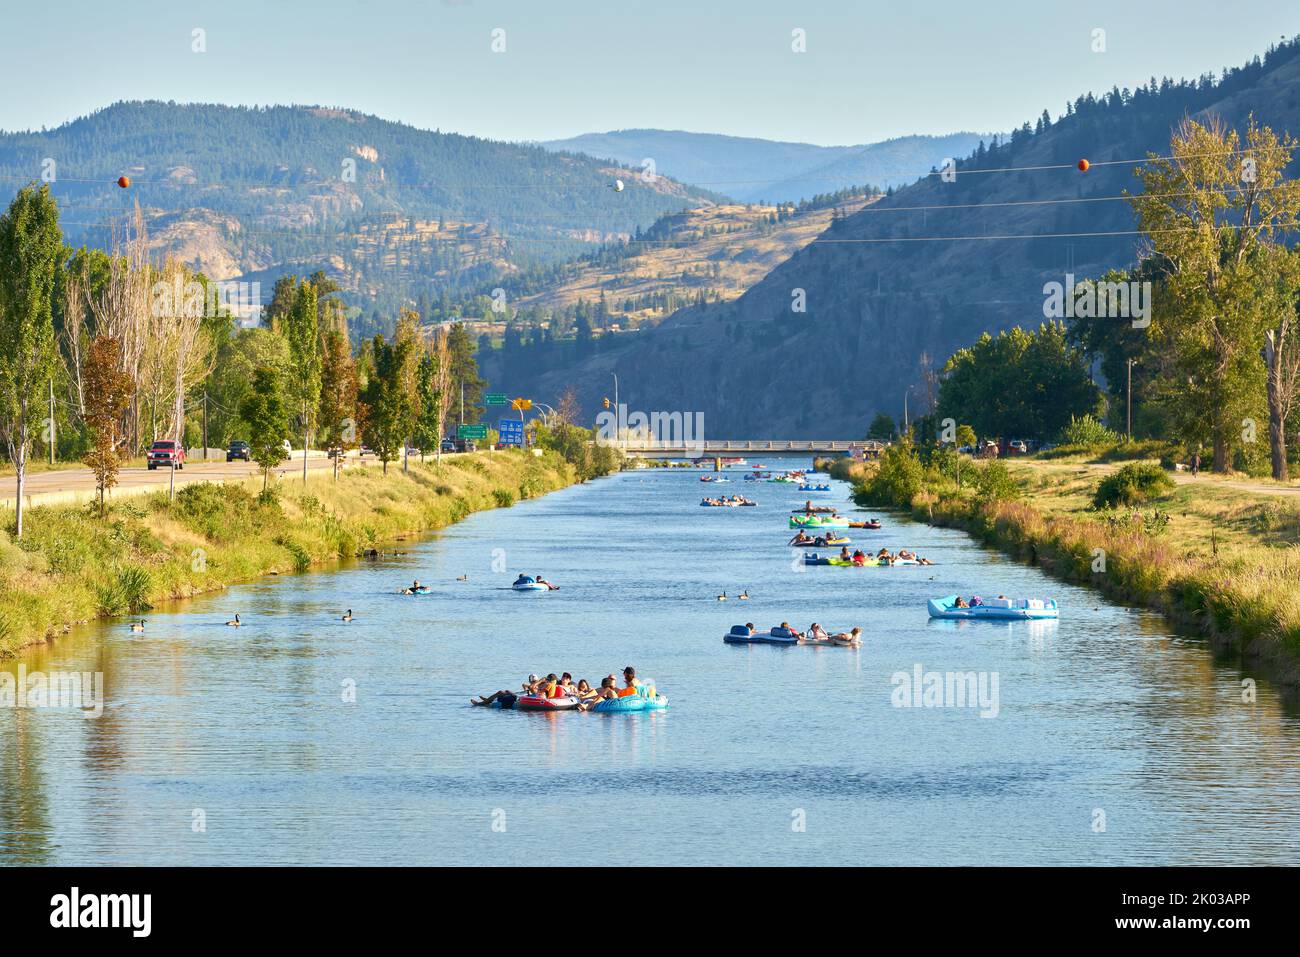 Penticton, British Columbia, Canada – July 20, 2019 Penticton River Channel Float. People drifting down the Penticton Channel in summer. Stock Photo